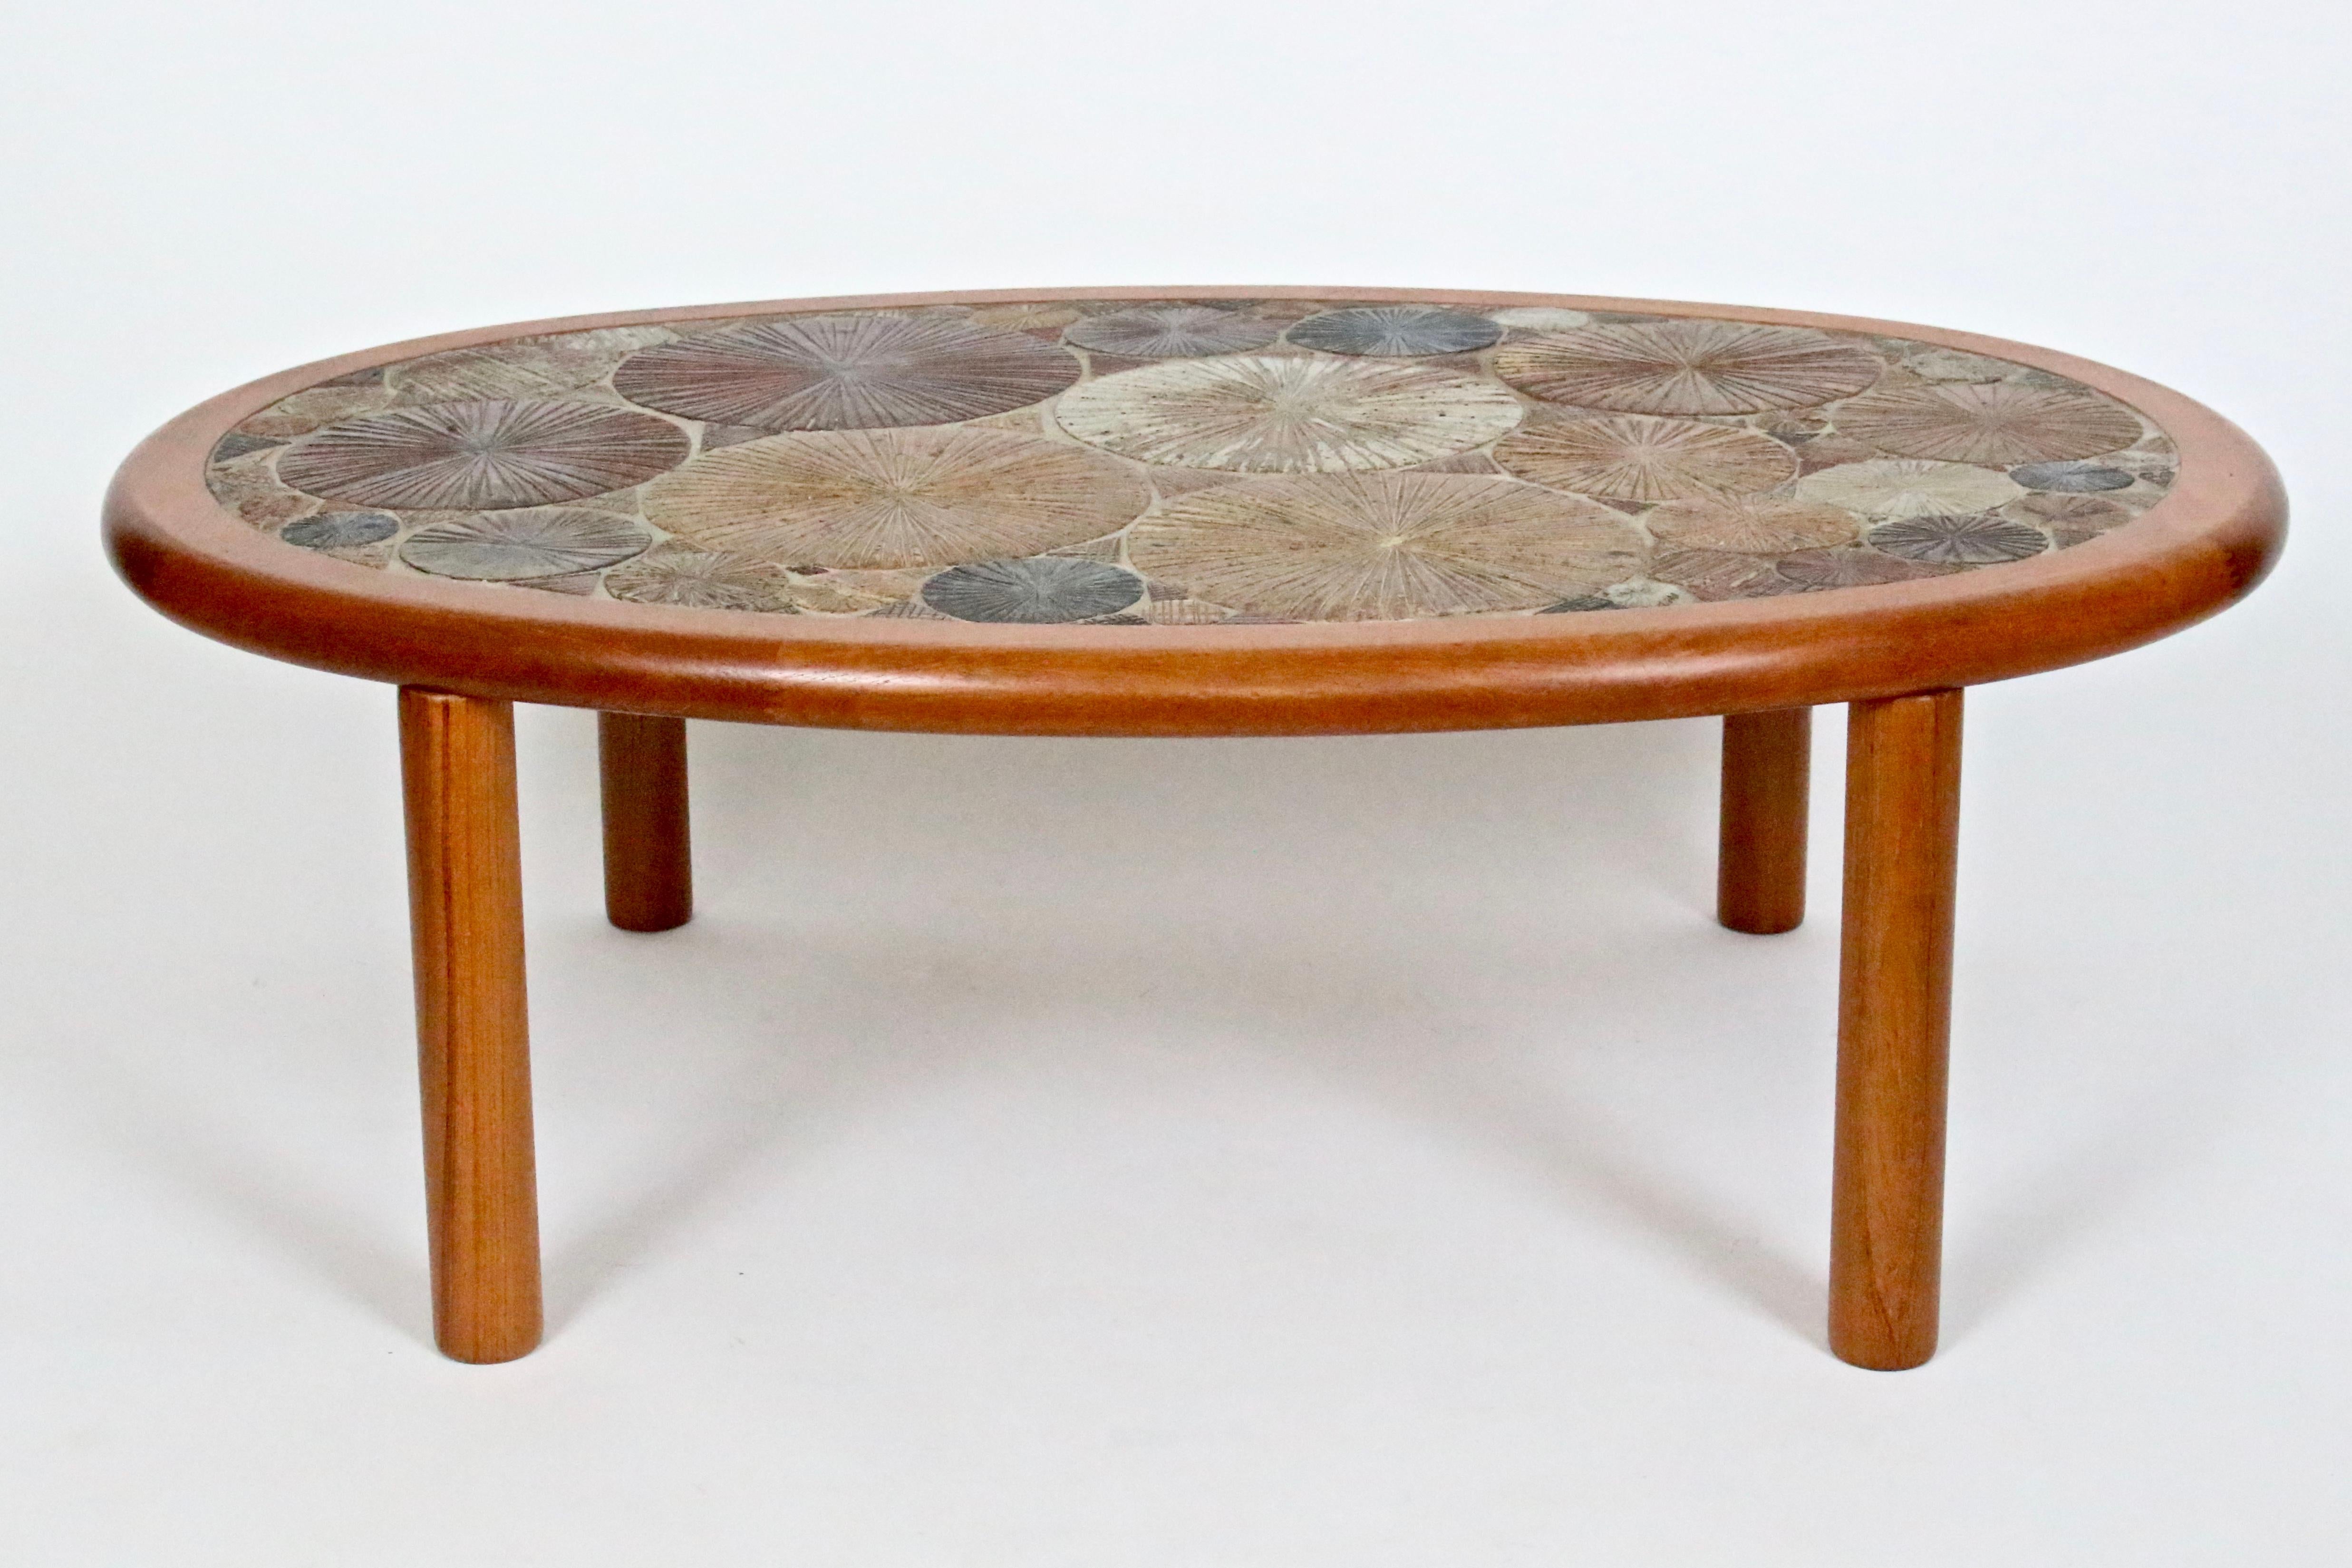 Danish modern handcrafted Tue Poulsen coffee cocktail table for Haslev Møbelsnedkeri A/S, Denmark. Featuring an oval teak form, inset with incised, hand painted bright glazed ceramic wheels in blue, brown, maroon, mustard, cream, rust and brown.